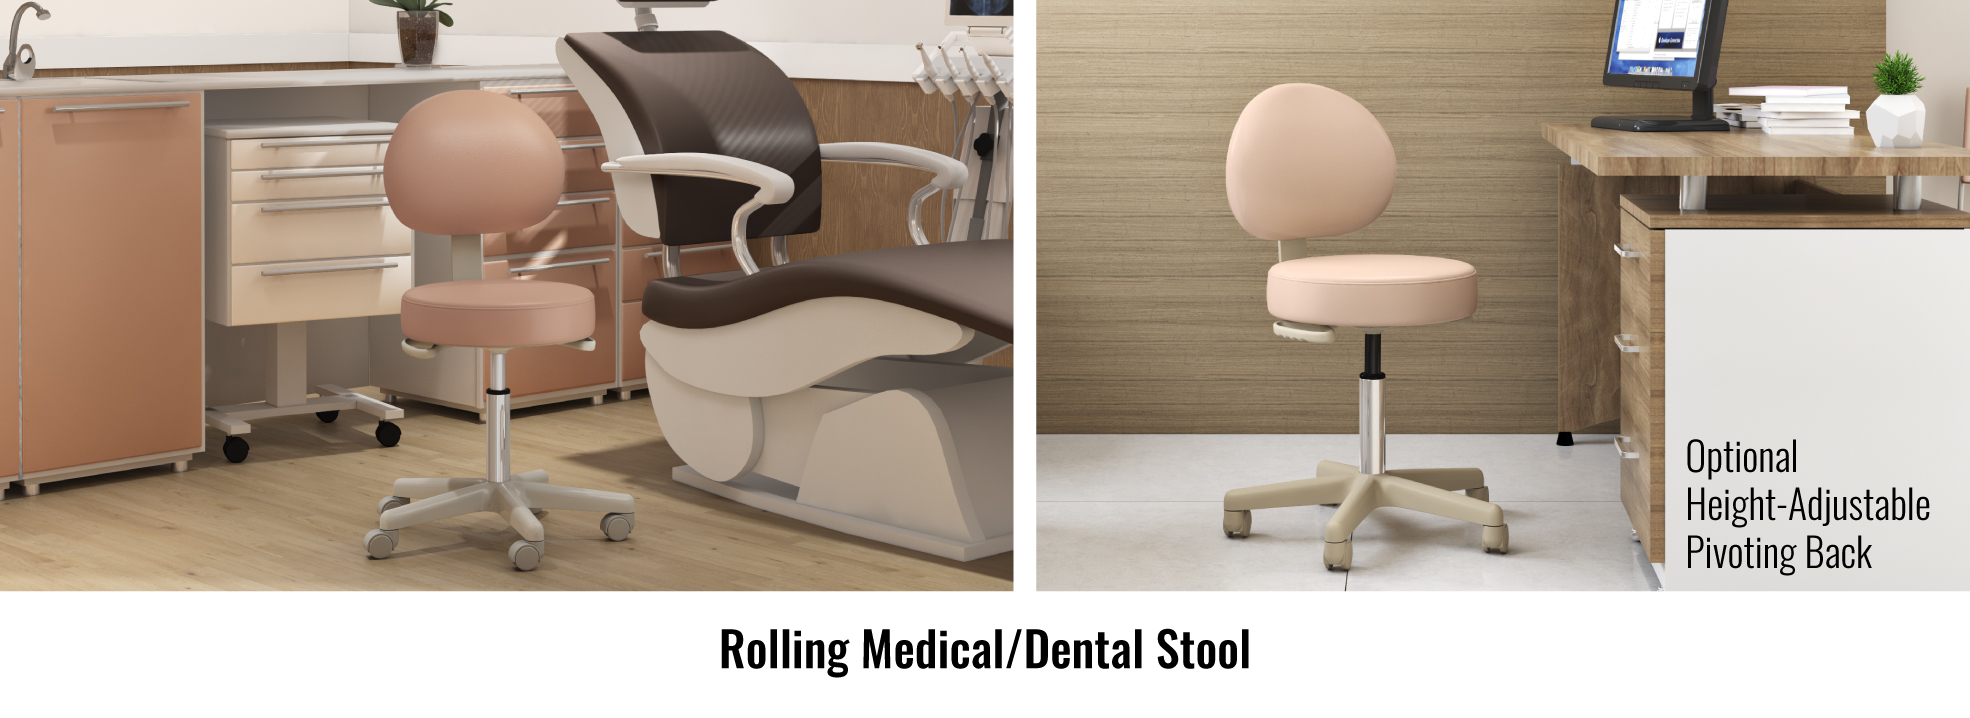 rolling-medical-stool-pivoting-back